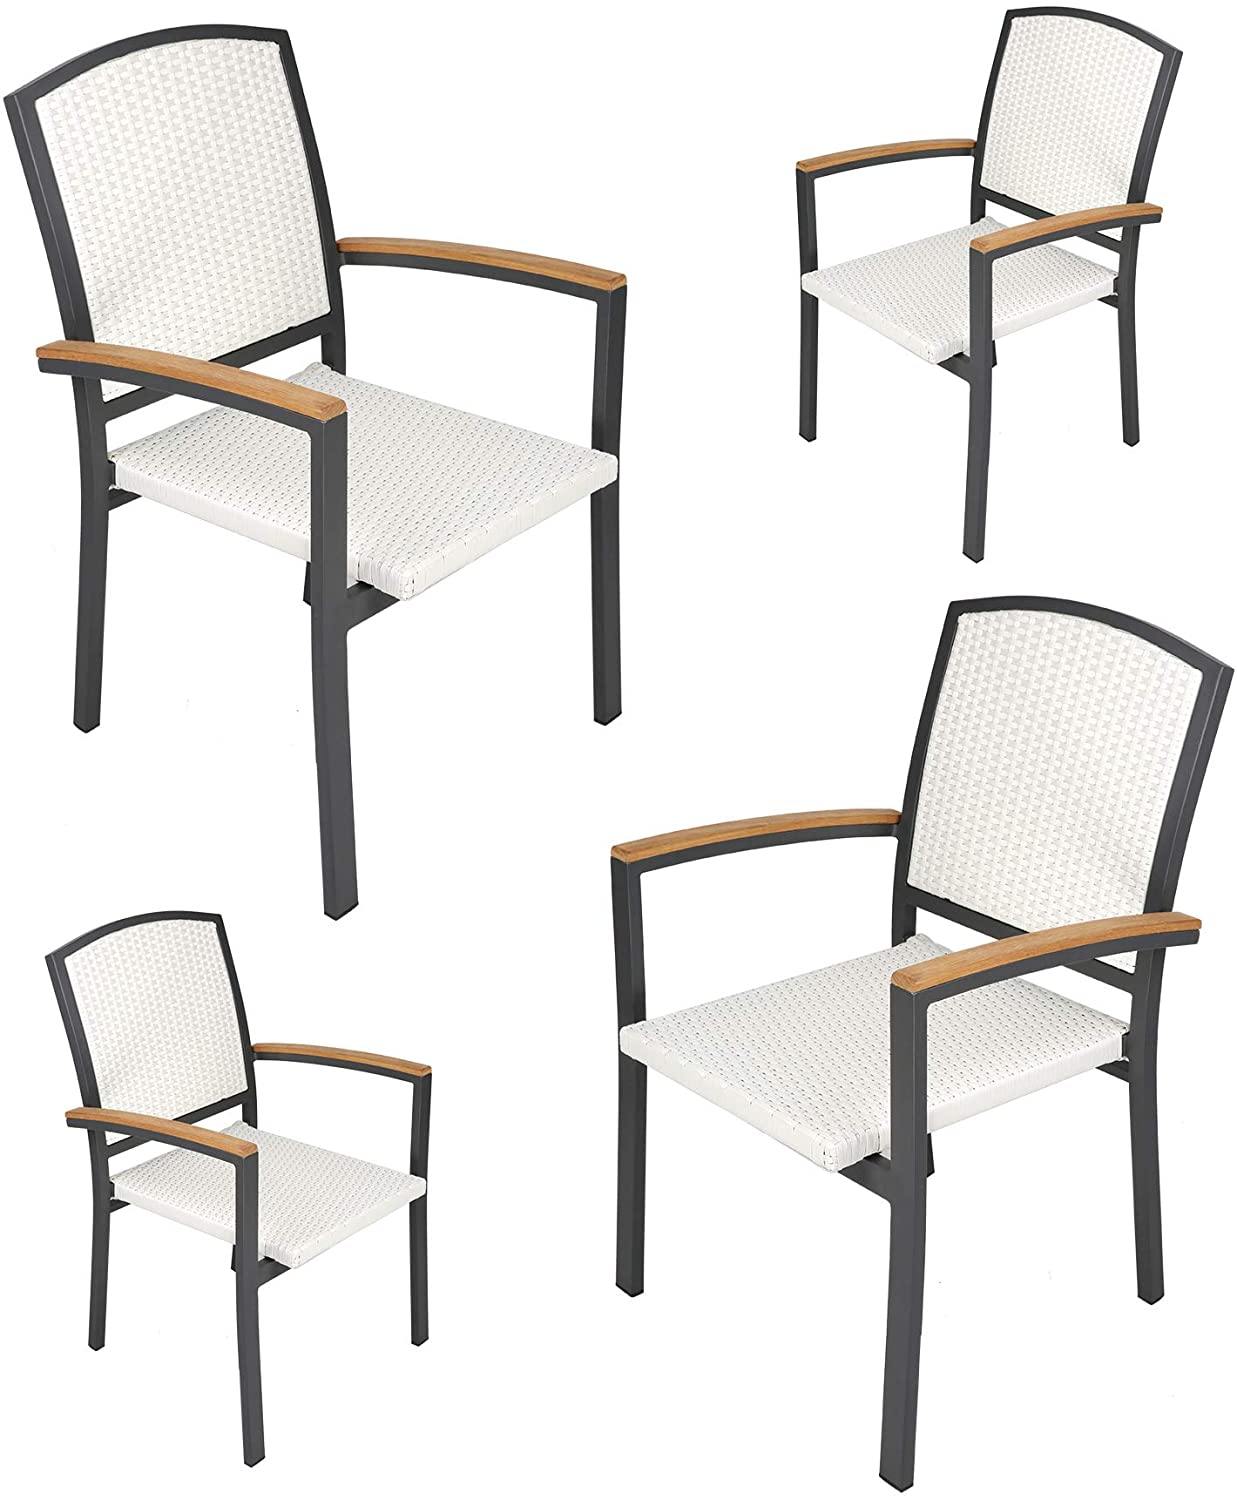 Outdoor Patio All Weather PE Rattan Dining Chairs with Aluminum Alloy Frame, Set of 4 Stackable Patio Garden Furniture - Bosonshop